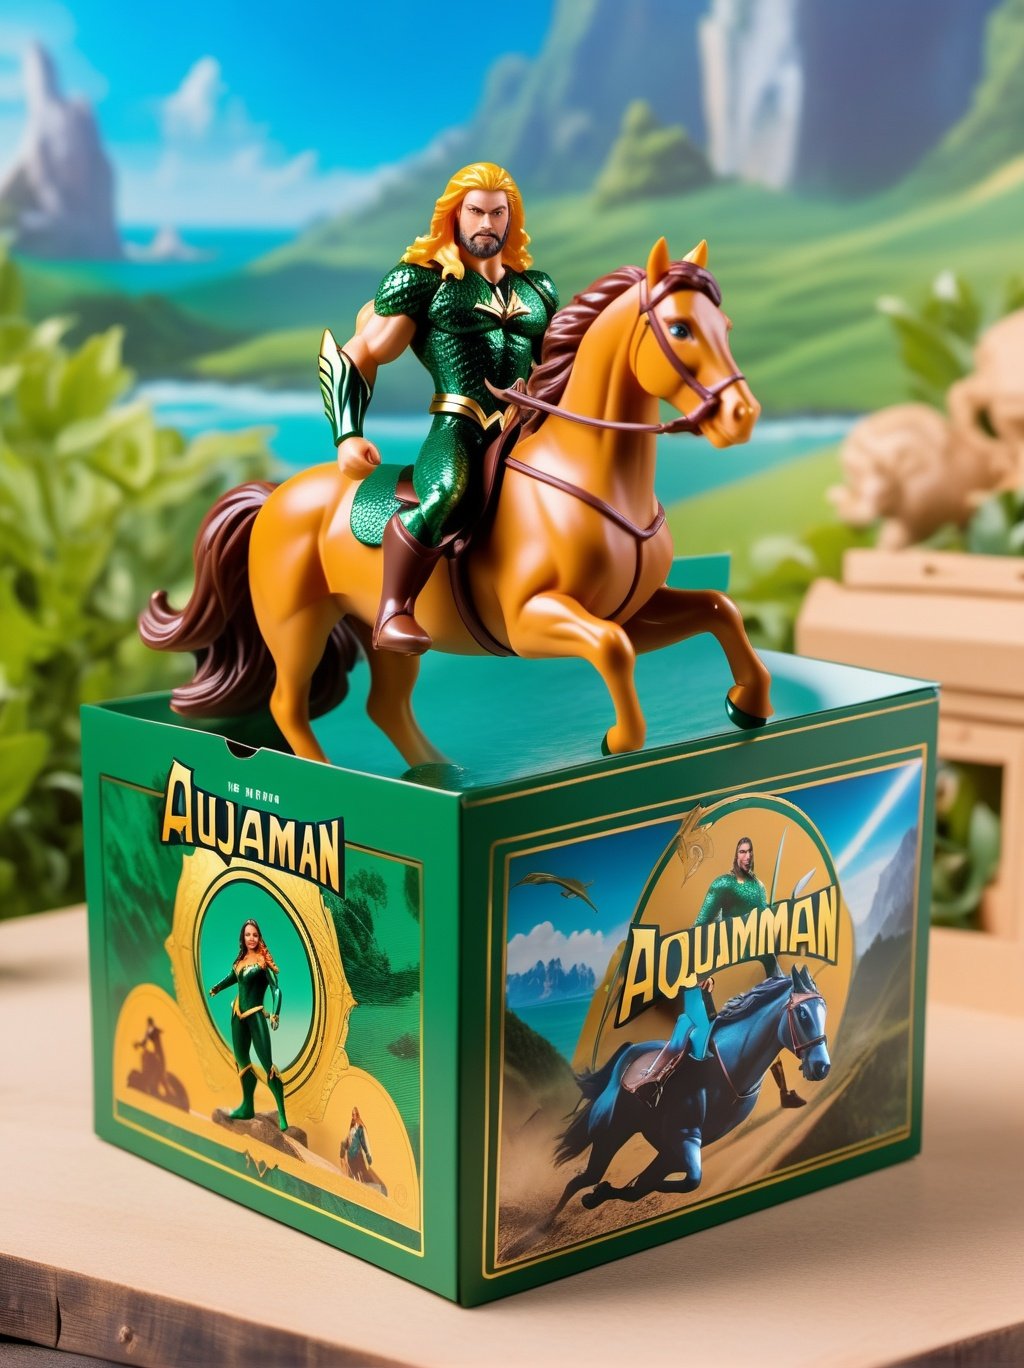 (8k, ultra quality, masterpiece:1.5), (Dutch angle:1.3), ActionFigureQuiron style,action figure box, solo, aquaman,  focus,  bodysuit, superhero,box,horse, horseback riding,full body, action figure, toy, doll, character print, (best quality:1.15), (detailed:1.15), (realistic:1.2), (intricate:1.4),  cover page, card, in a gift box, no humans,  gift box, playset, in a box, full body, toy playset pack, in a gift box, premium playset toy box,<lyco:SDXL1.0_quiron_ActionFigure_v4.1_lycoris:1.0>